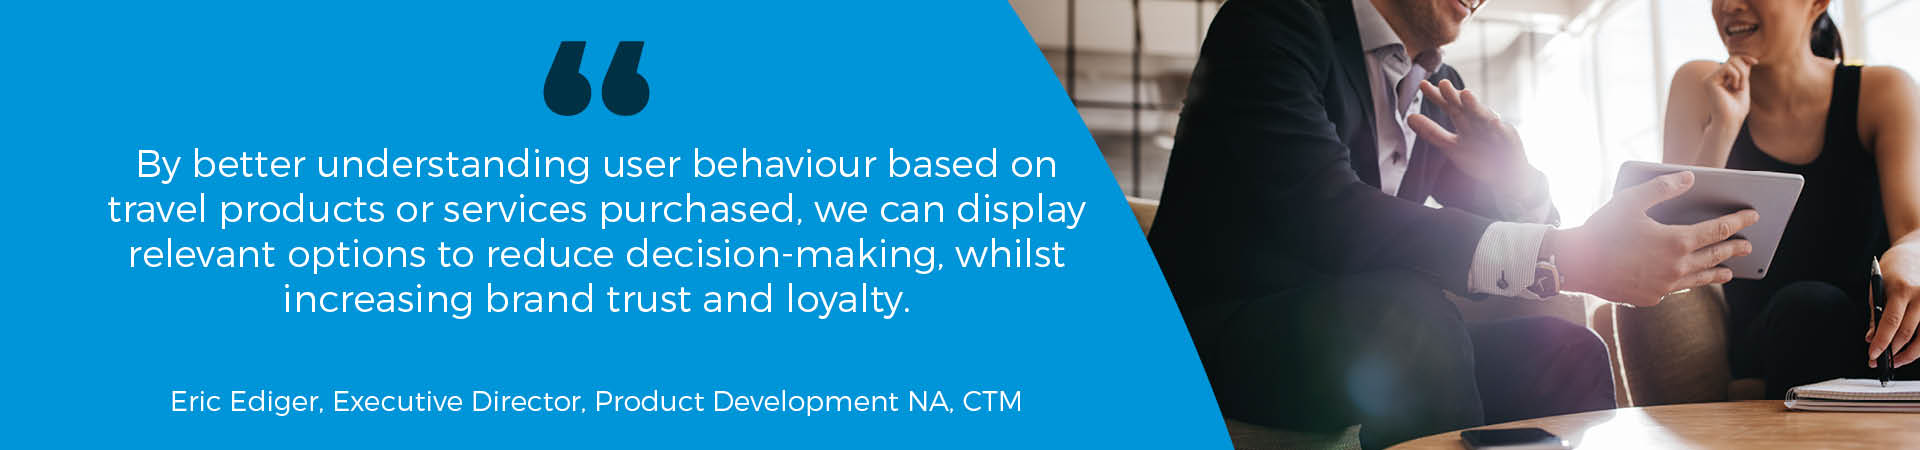 Banner - "By better understanding user behaviour based on travel products or services purchased, we can display relevant options to reduce decision-making, whilst increasing brand trust and loyalty" quote from Eric Ediger